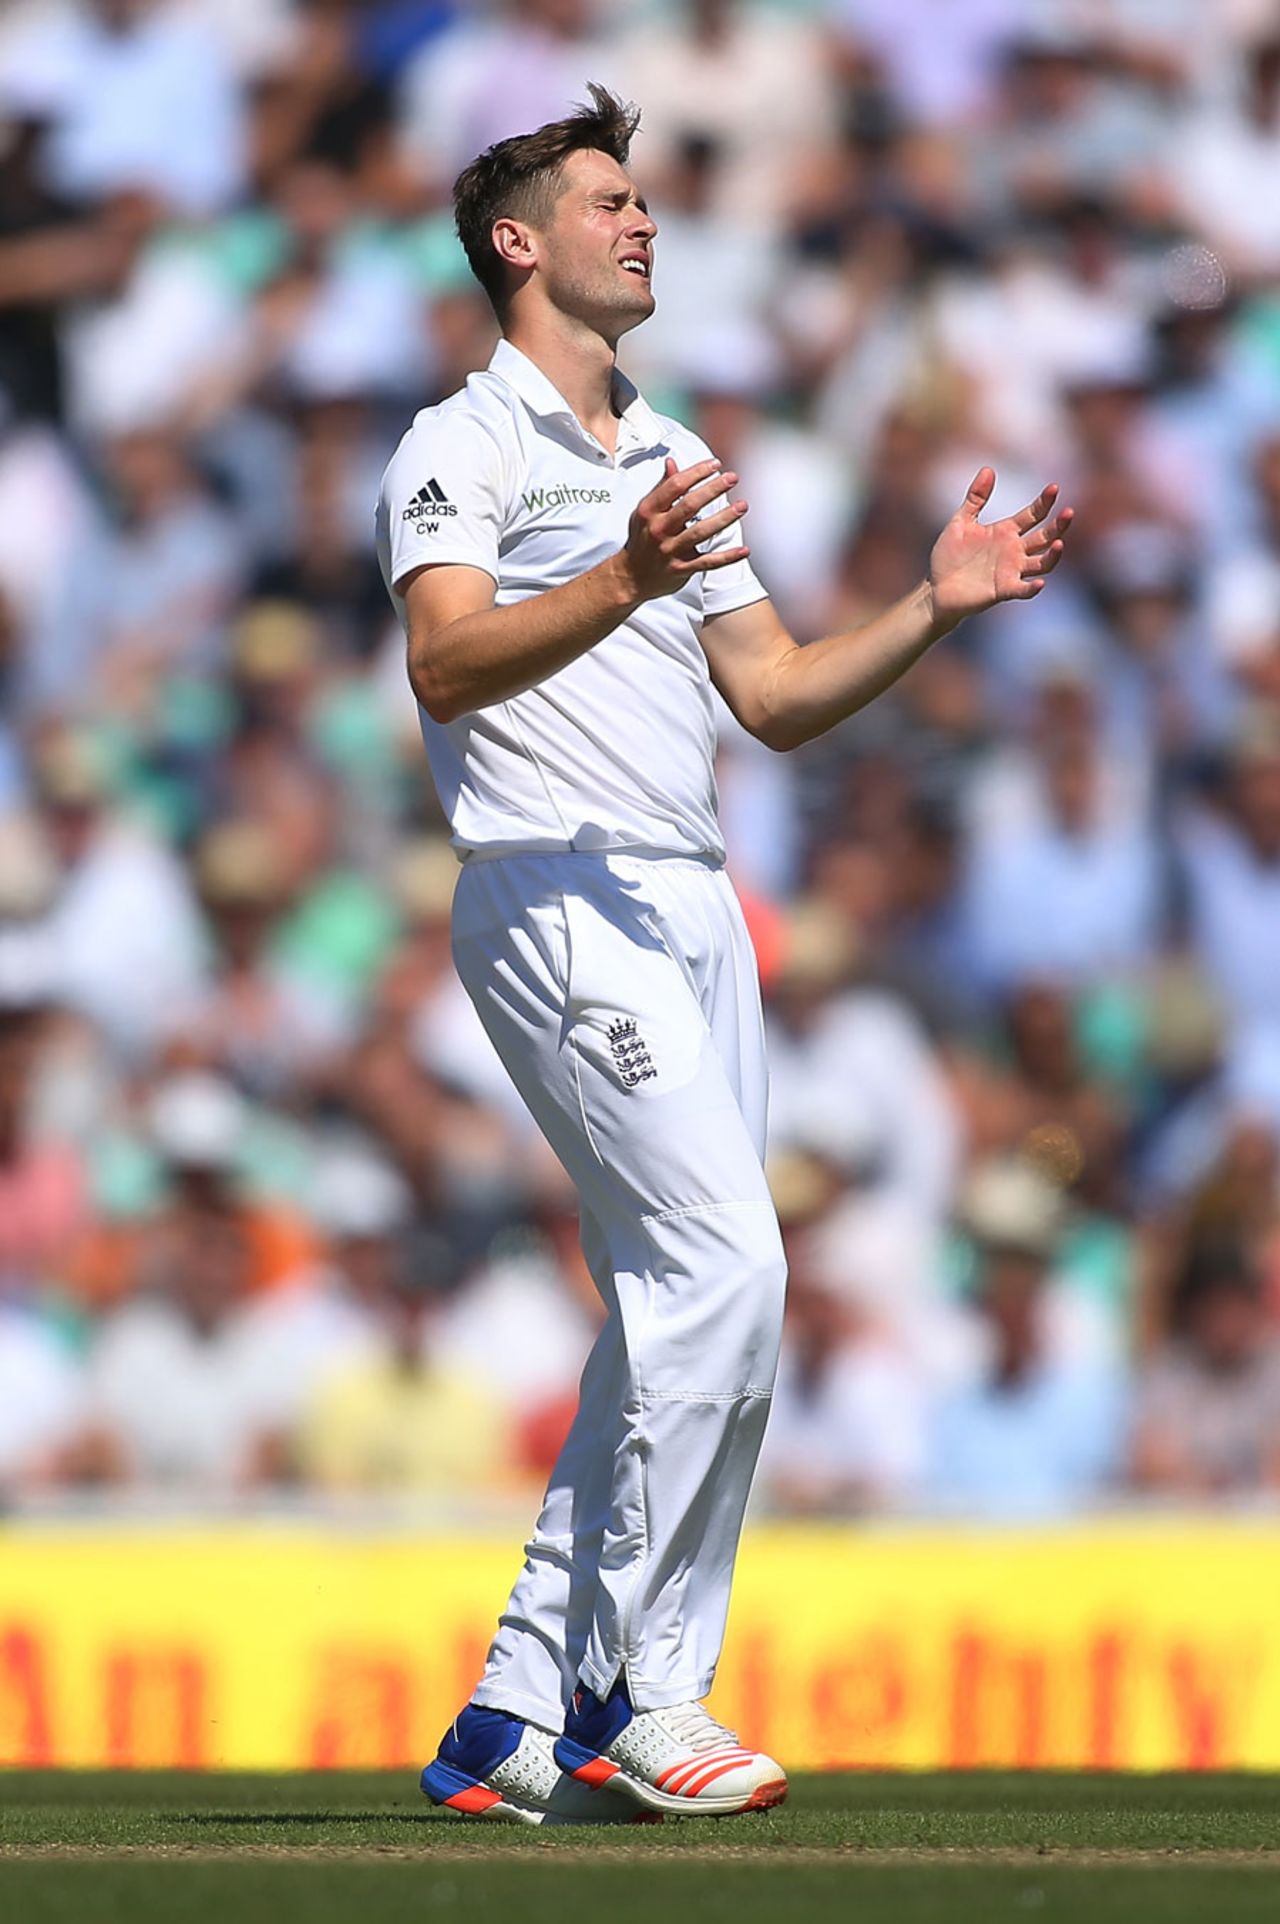 Chris Woakes saw chances go down off his bowling, England v Pakistan, 4th Test, The Oval, 2nd day, August 12, 2016